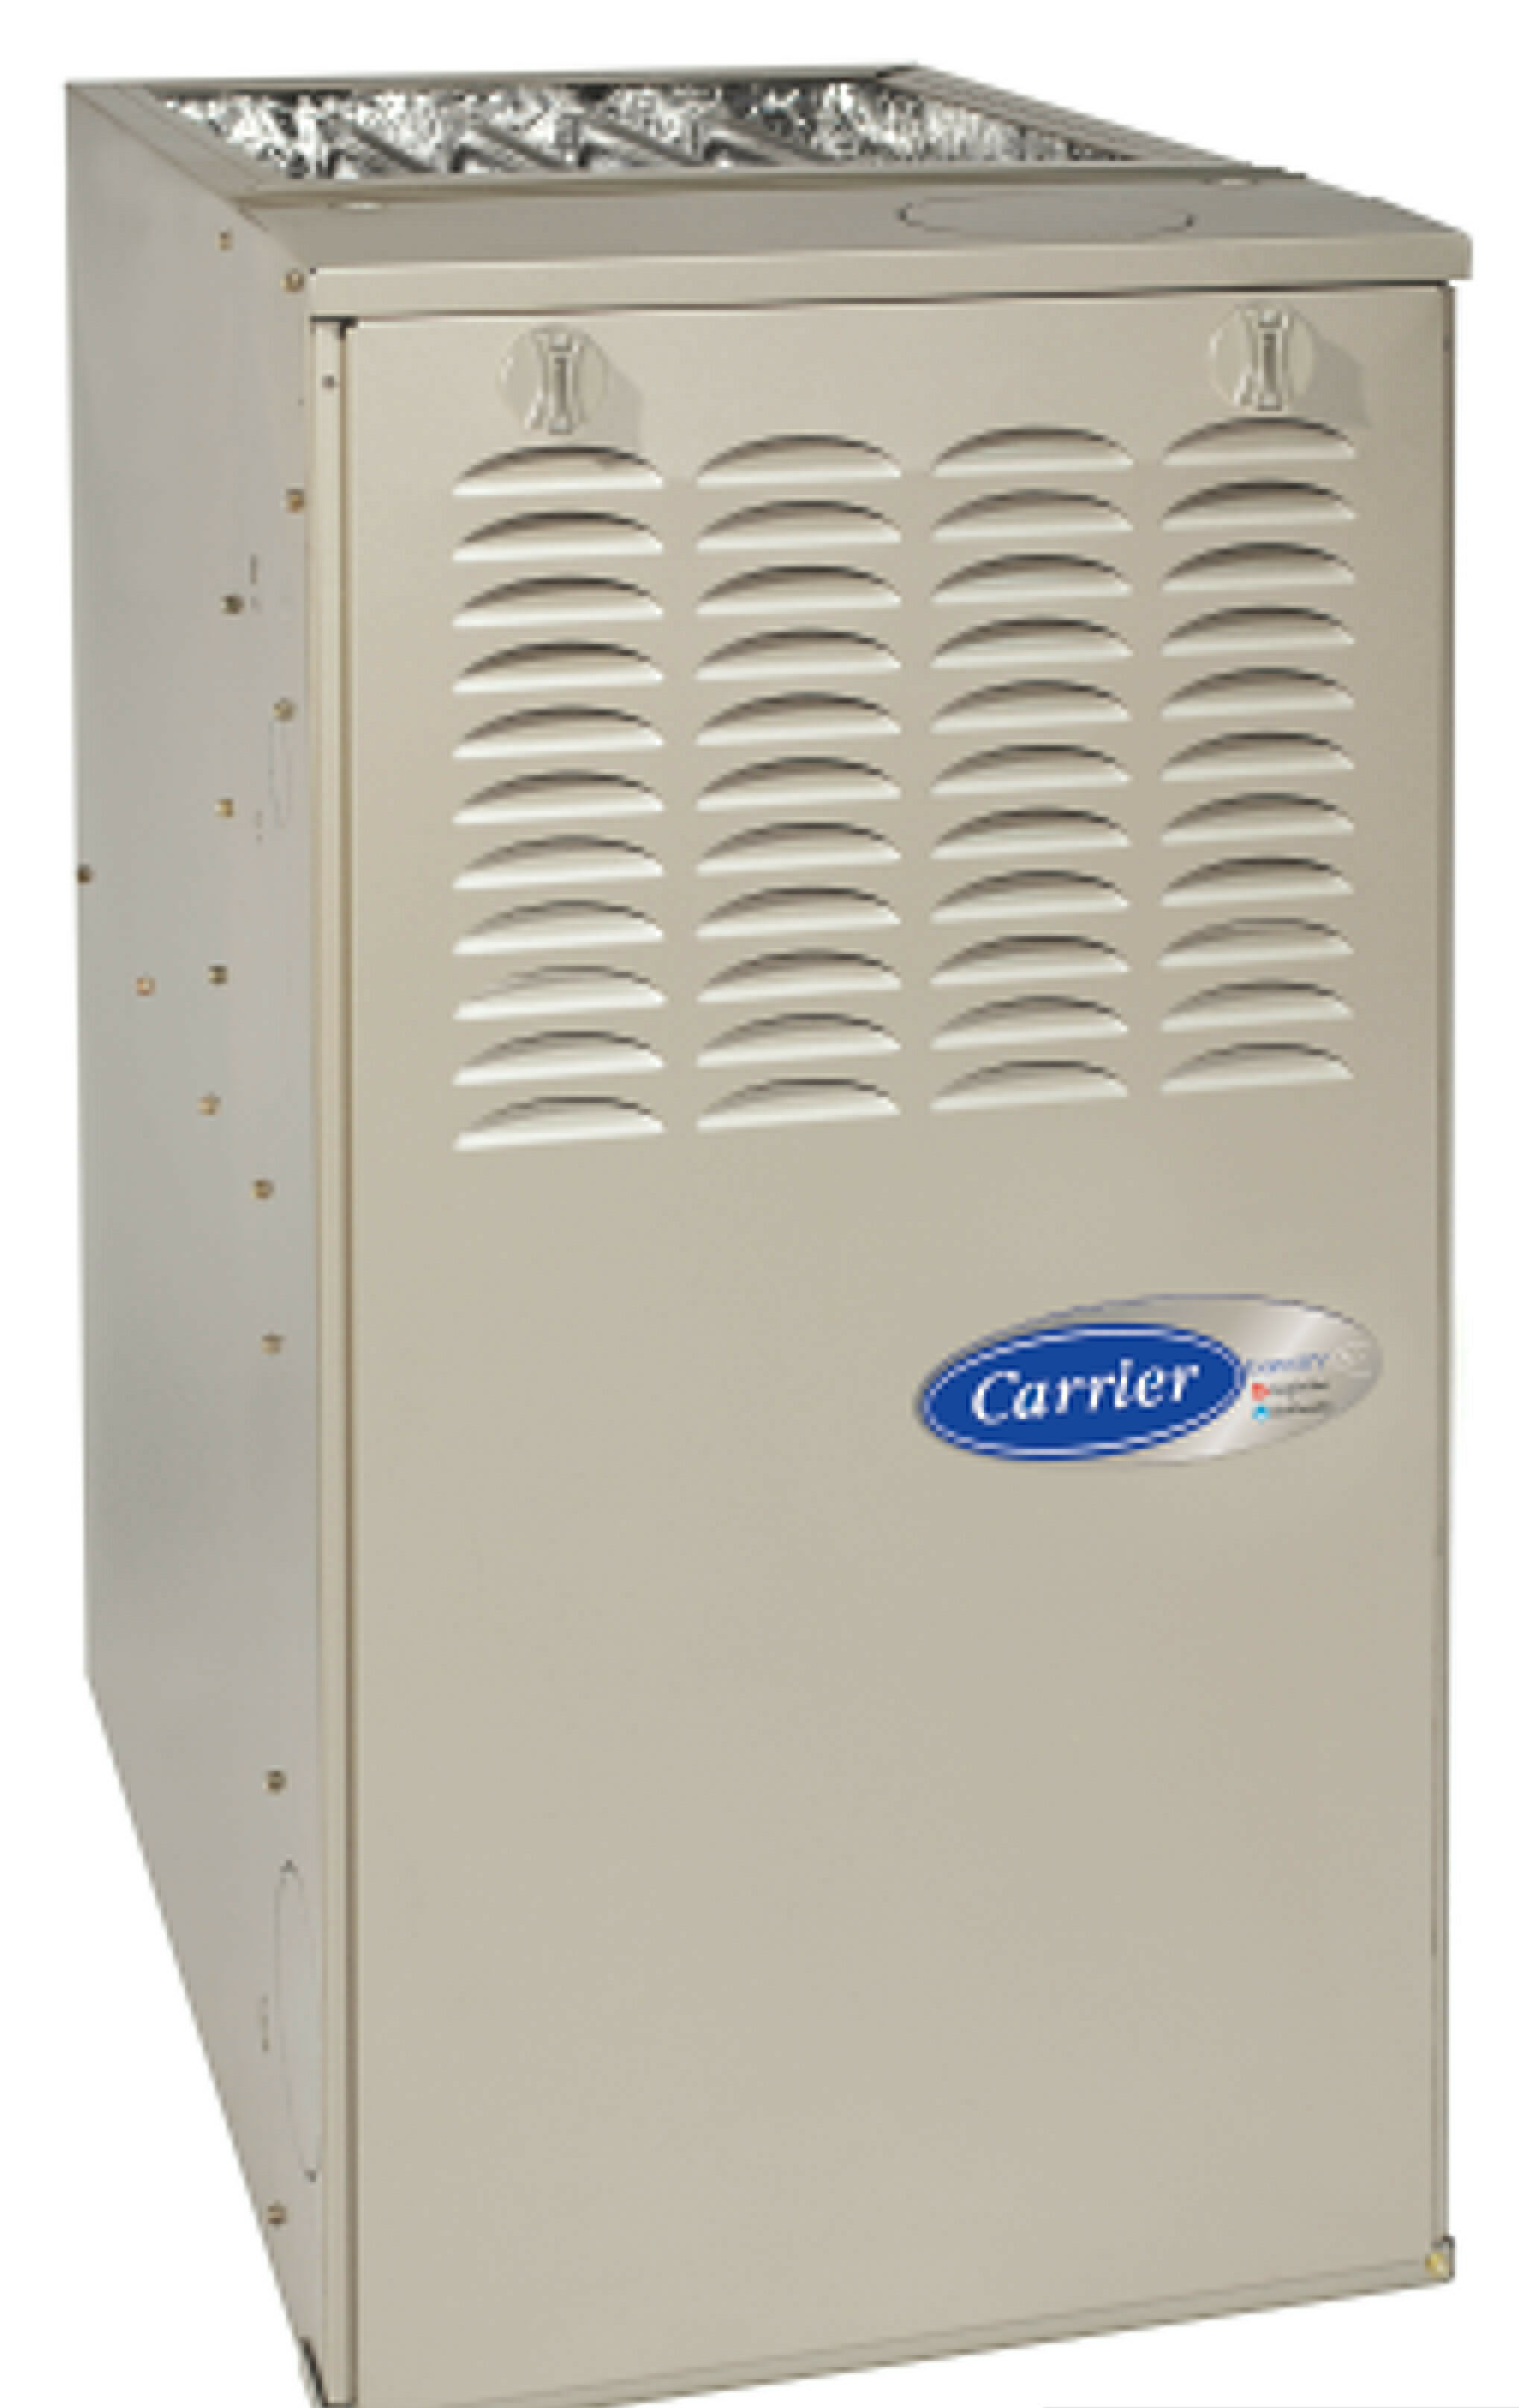 Carrier air conditioner from Warren Heating and Cooling